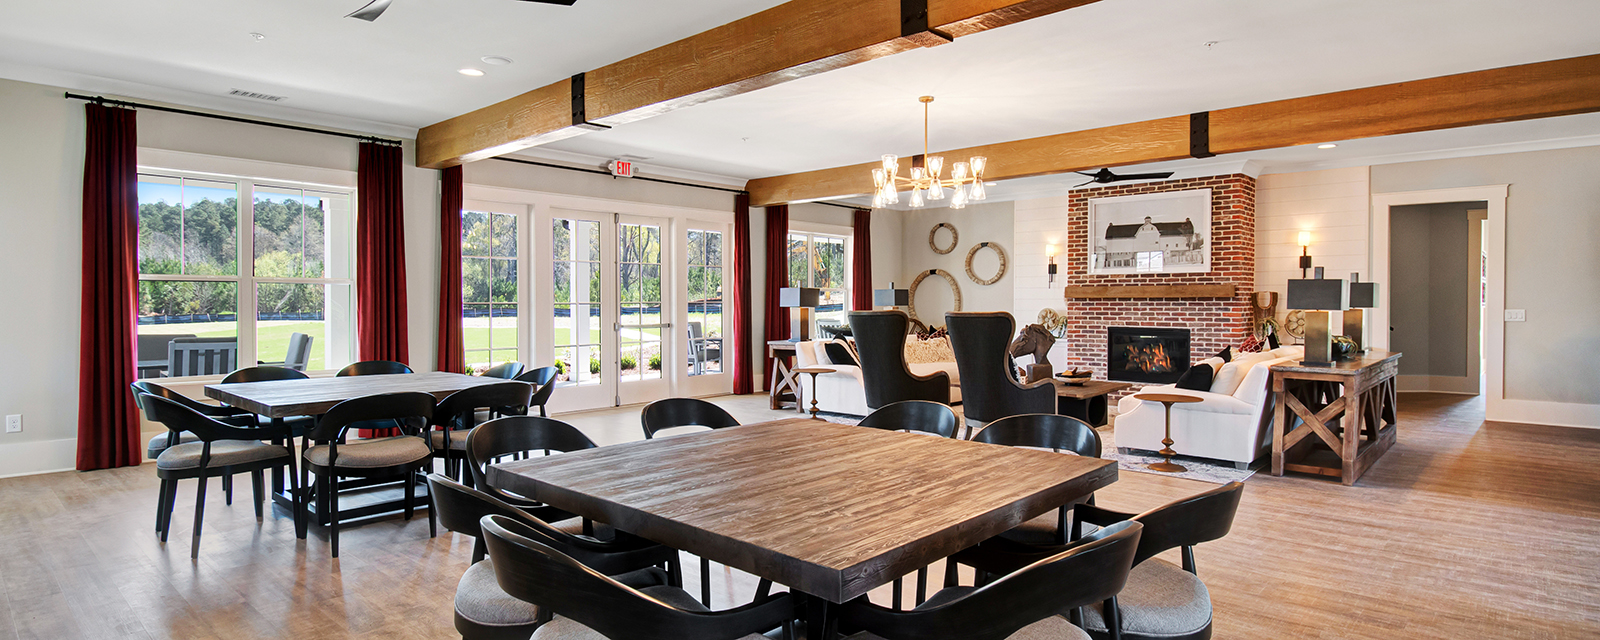 Our active adult 55+ communities throughout Georgia provide the ultimate atmosphere for gathering with neighbors to relax, enjoy some wine or even a barbeque. 